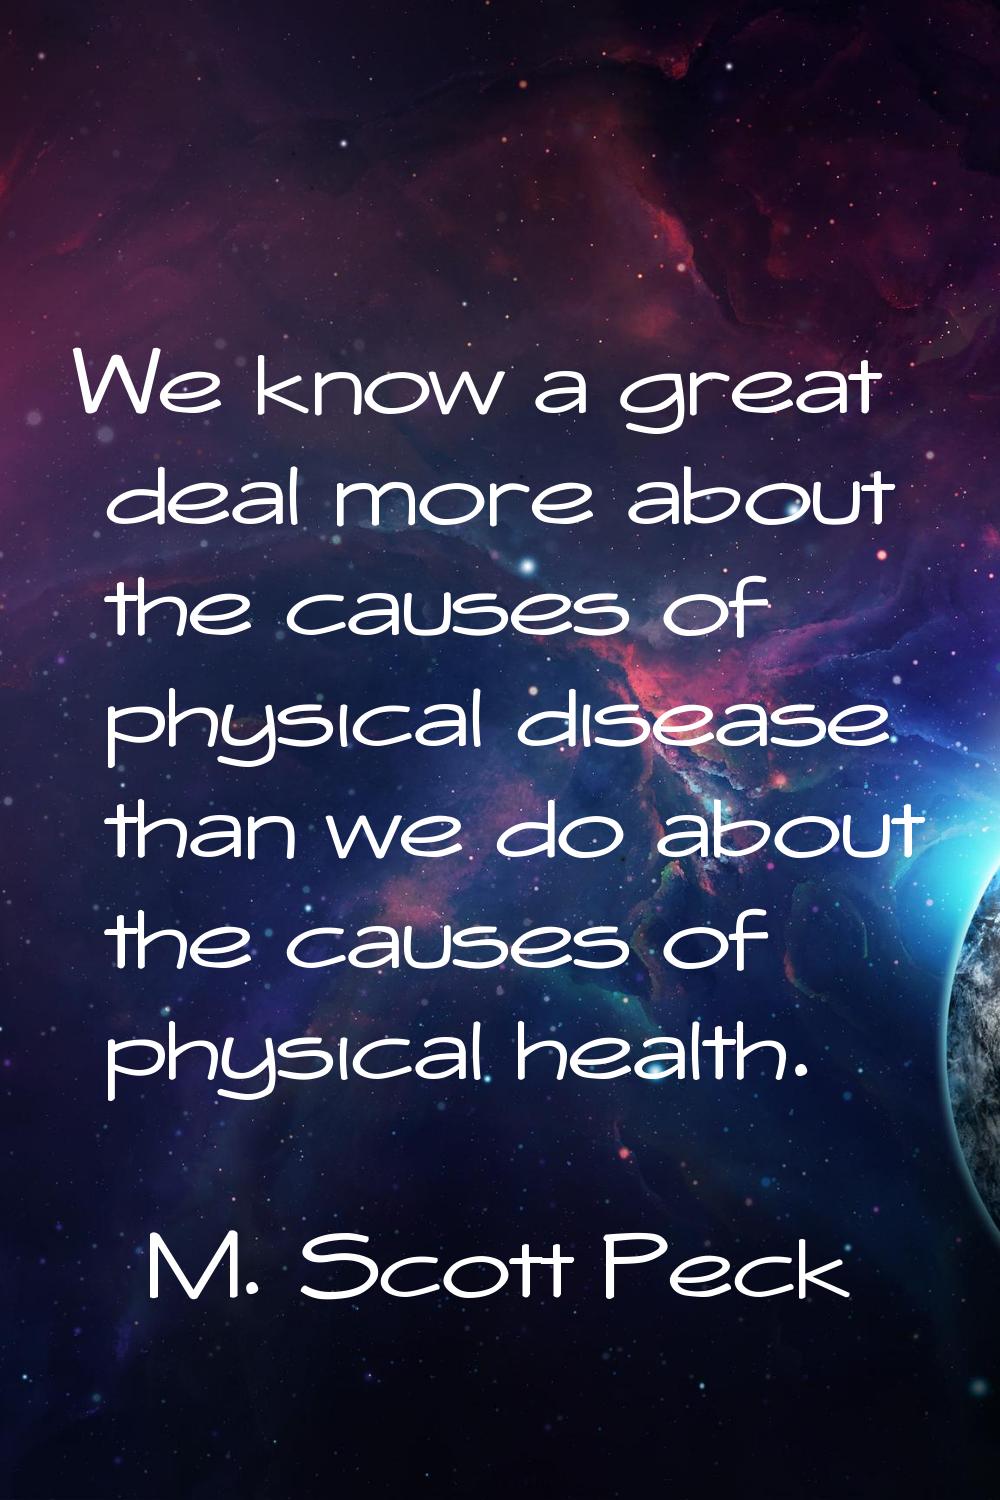 We know a great deal more about the causes of physical disease than we do about the causes of physi